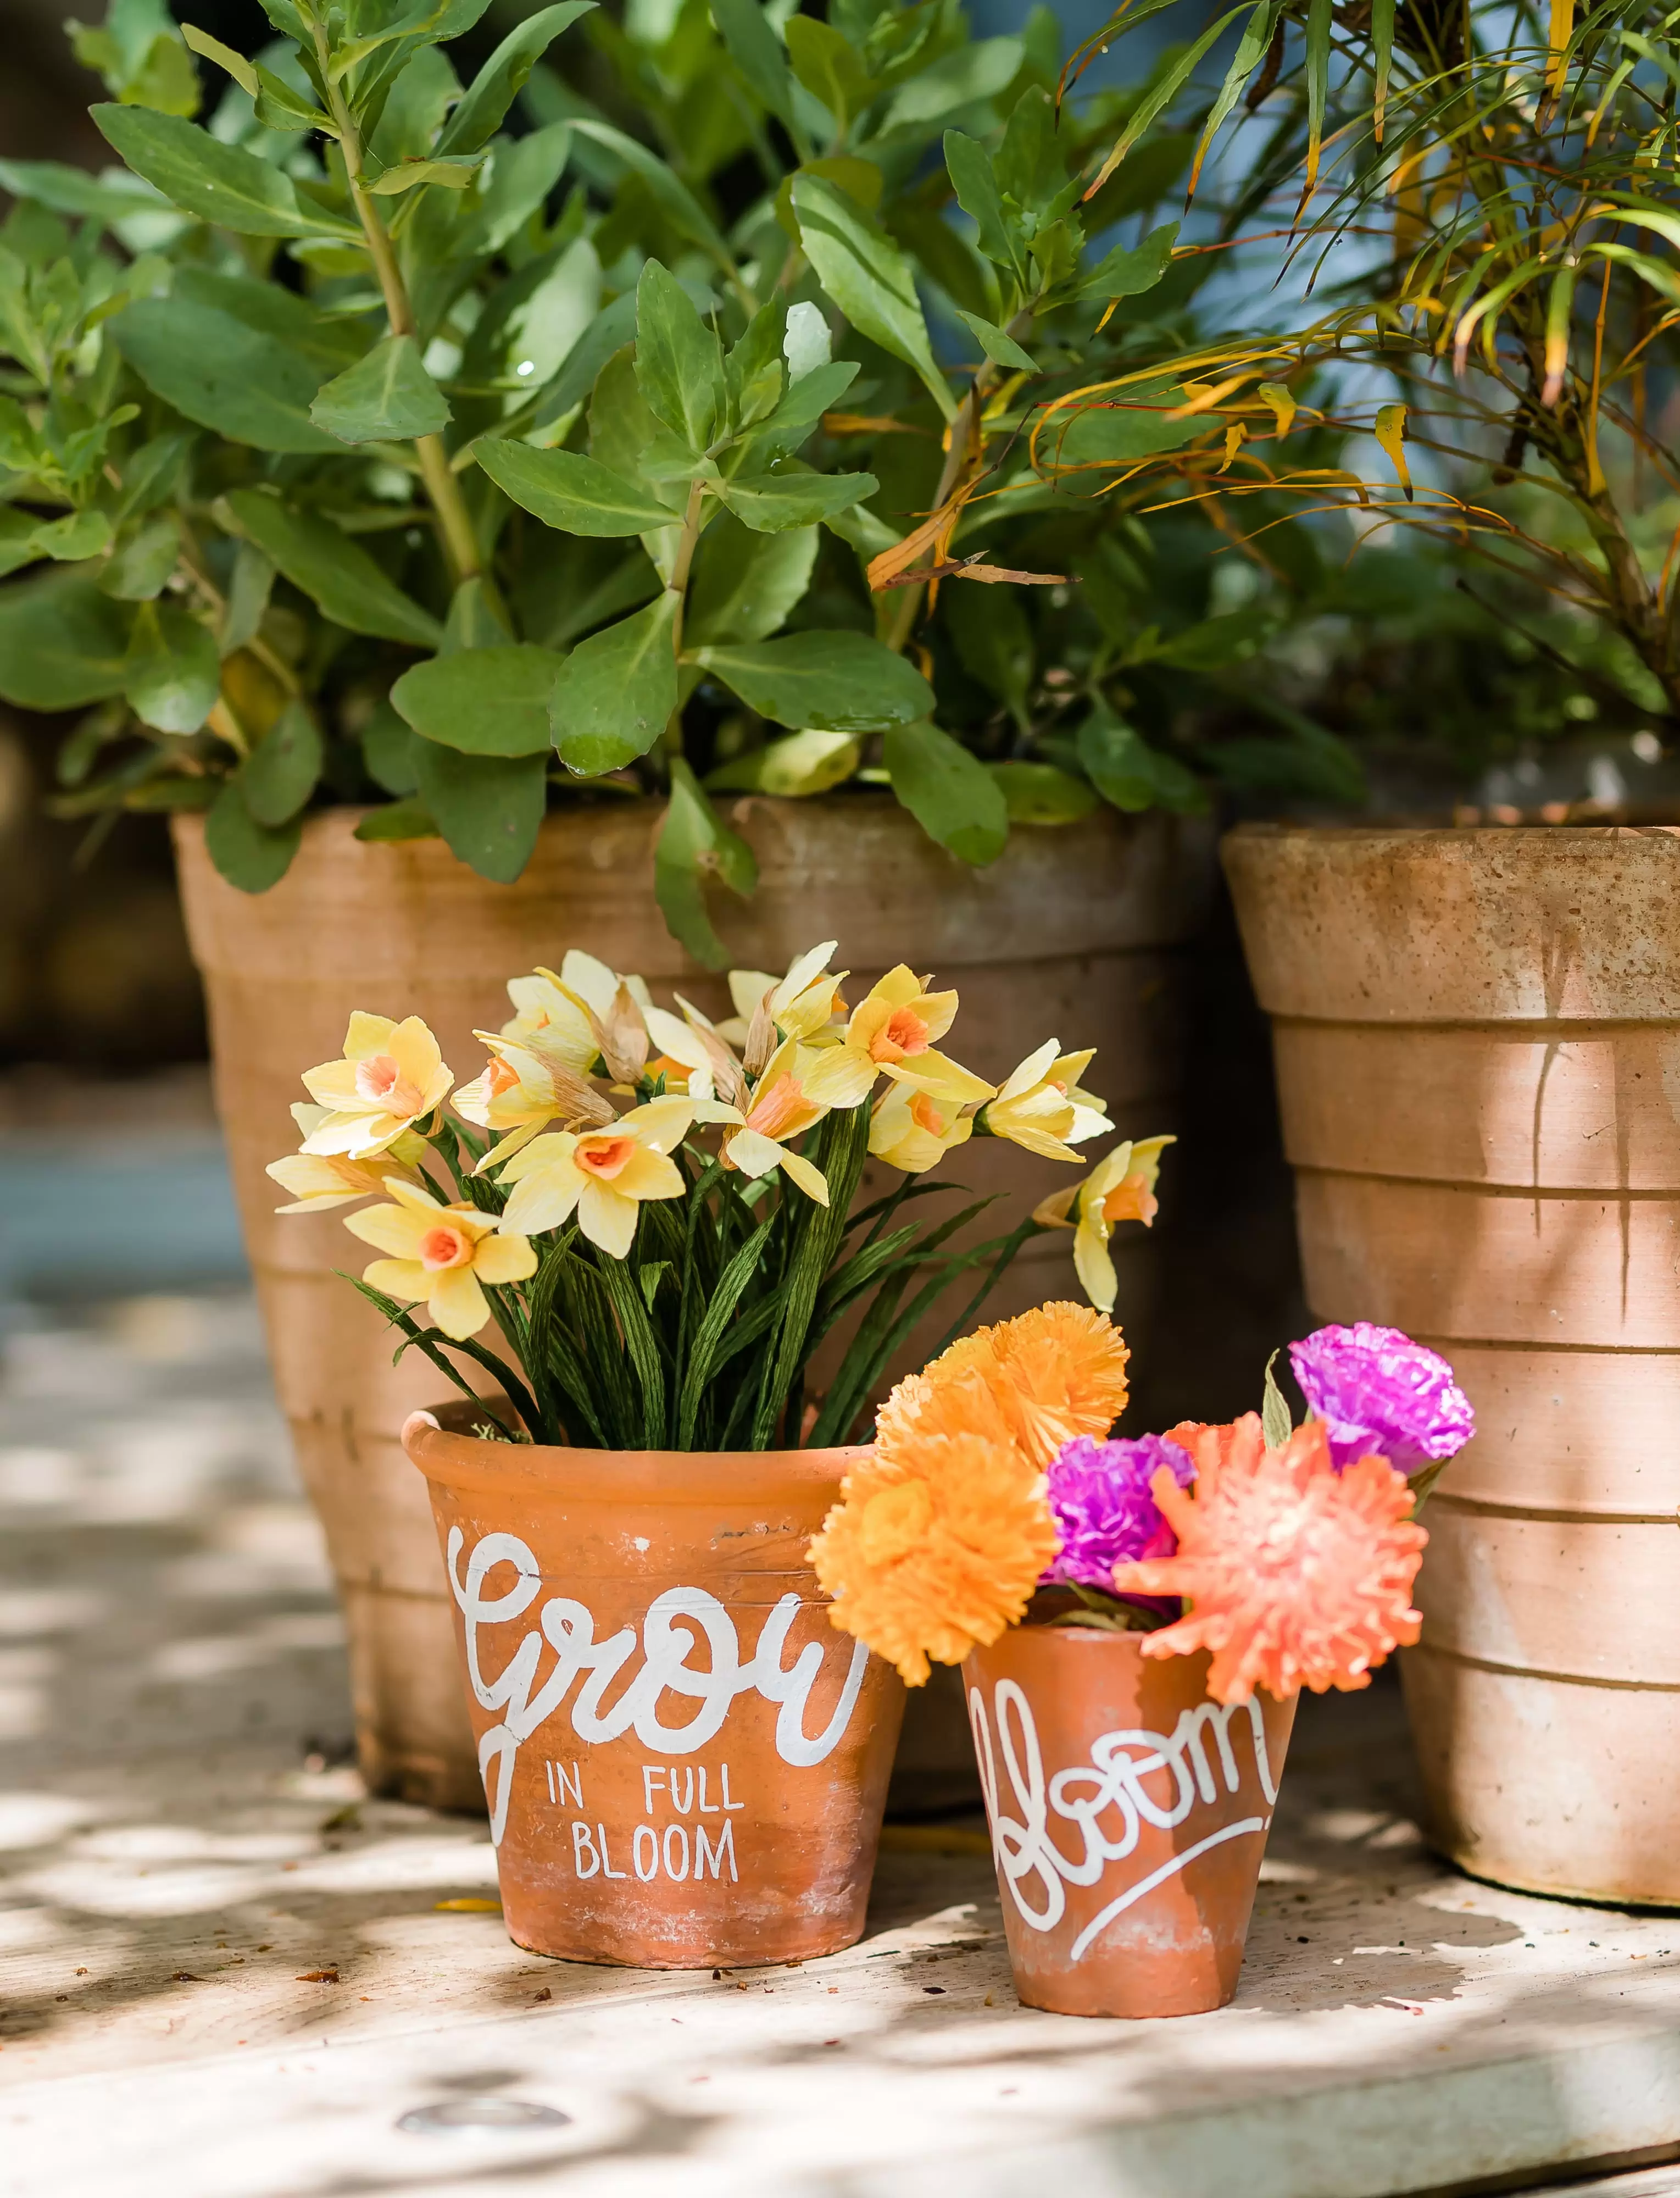 Terracotta pot by Curly Kale Design that says 'Grow in full bloom'